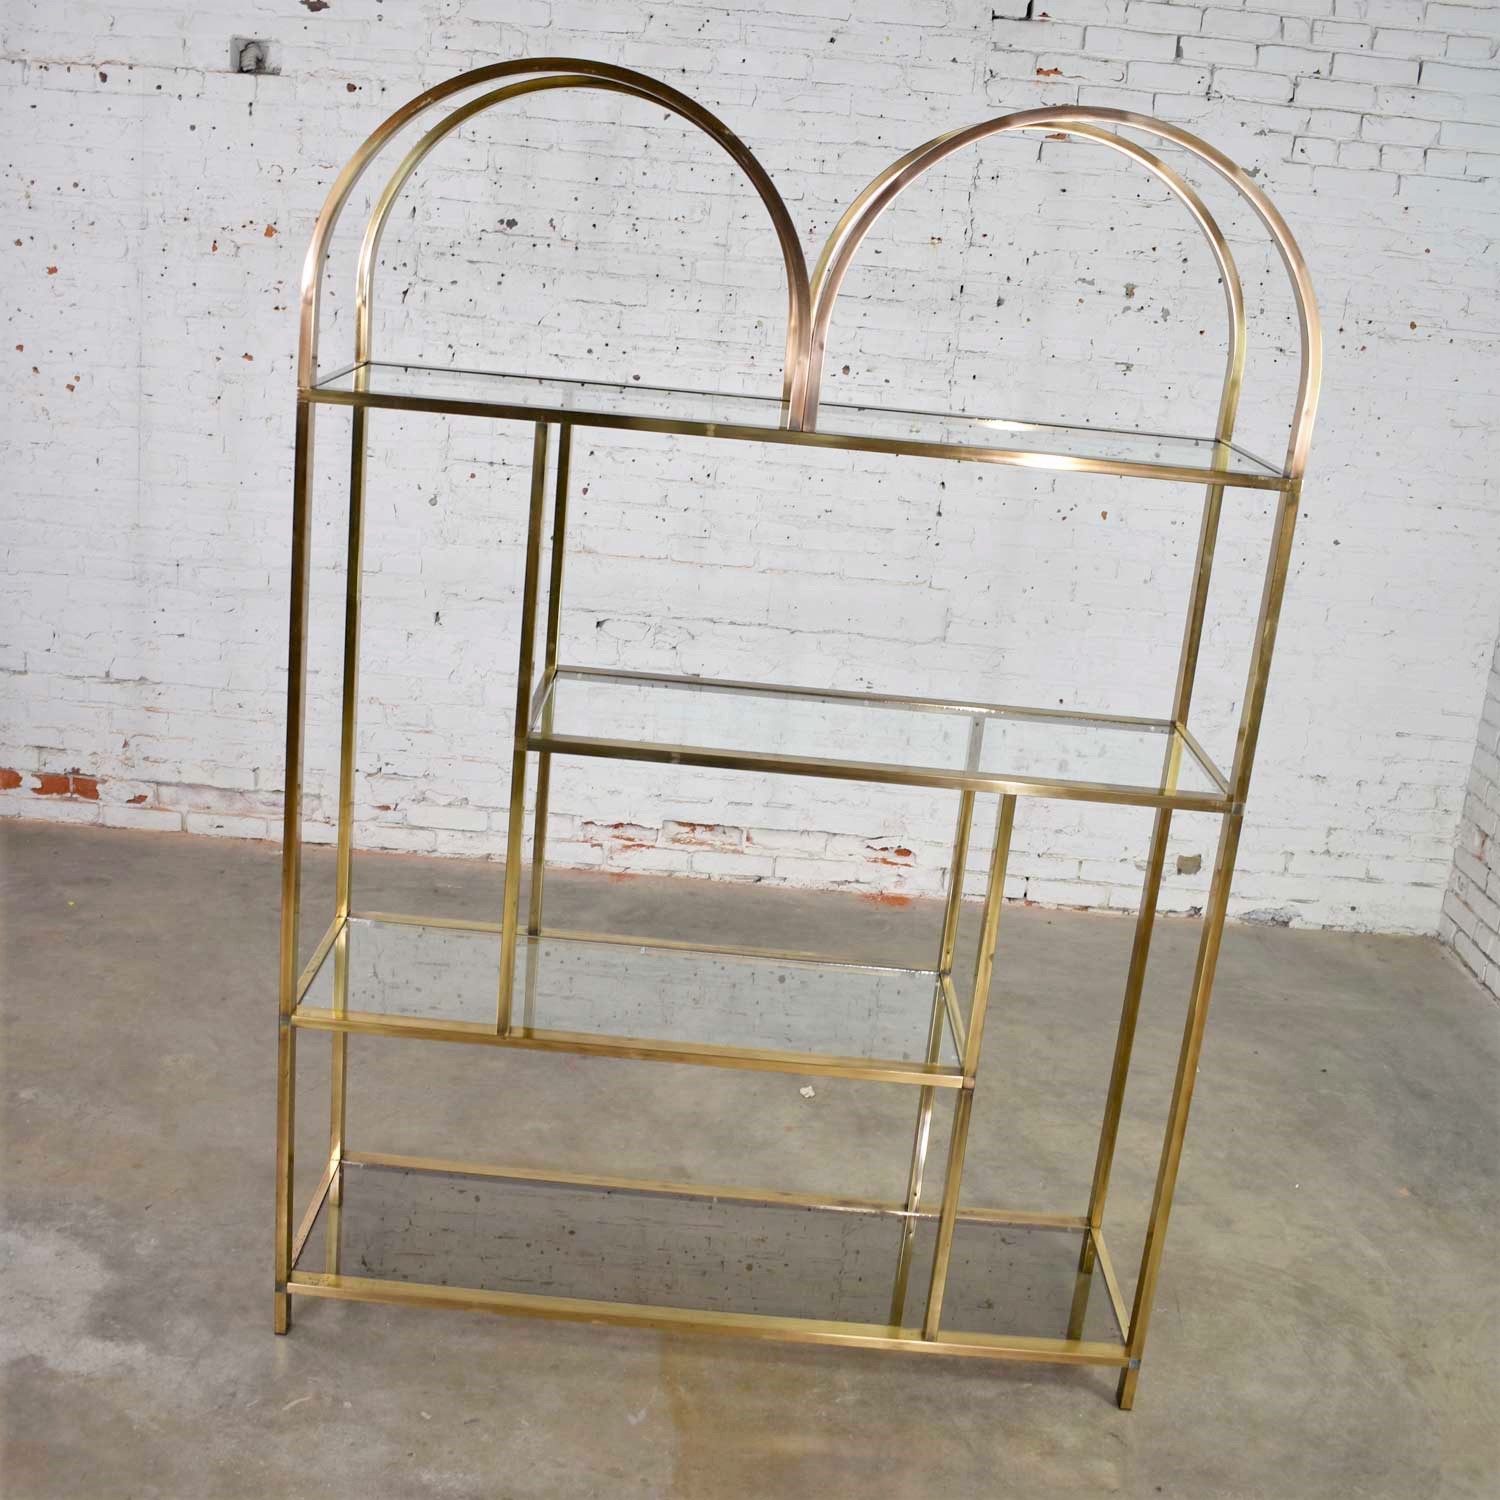 Vintage Modern Double Arched Etagere Display Shelves Brass Plated and Glass